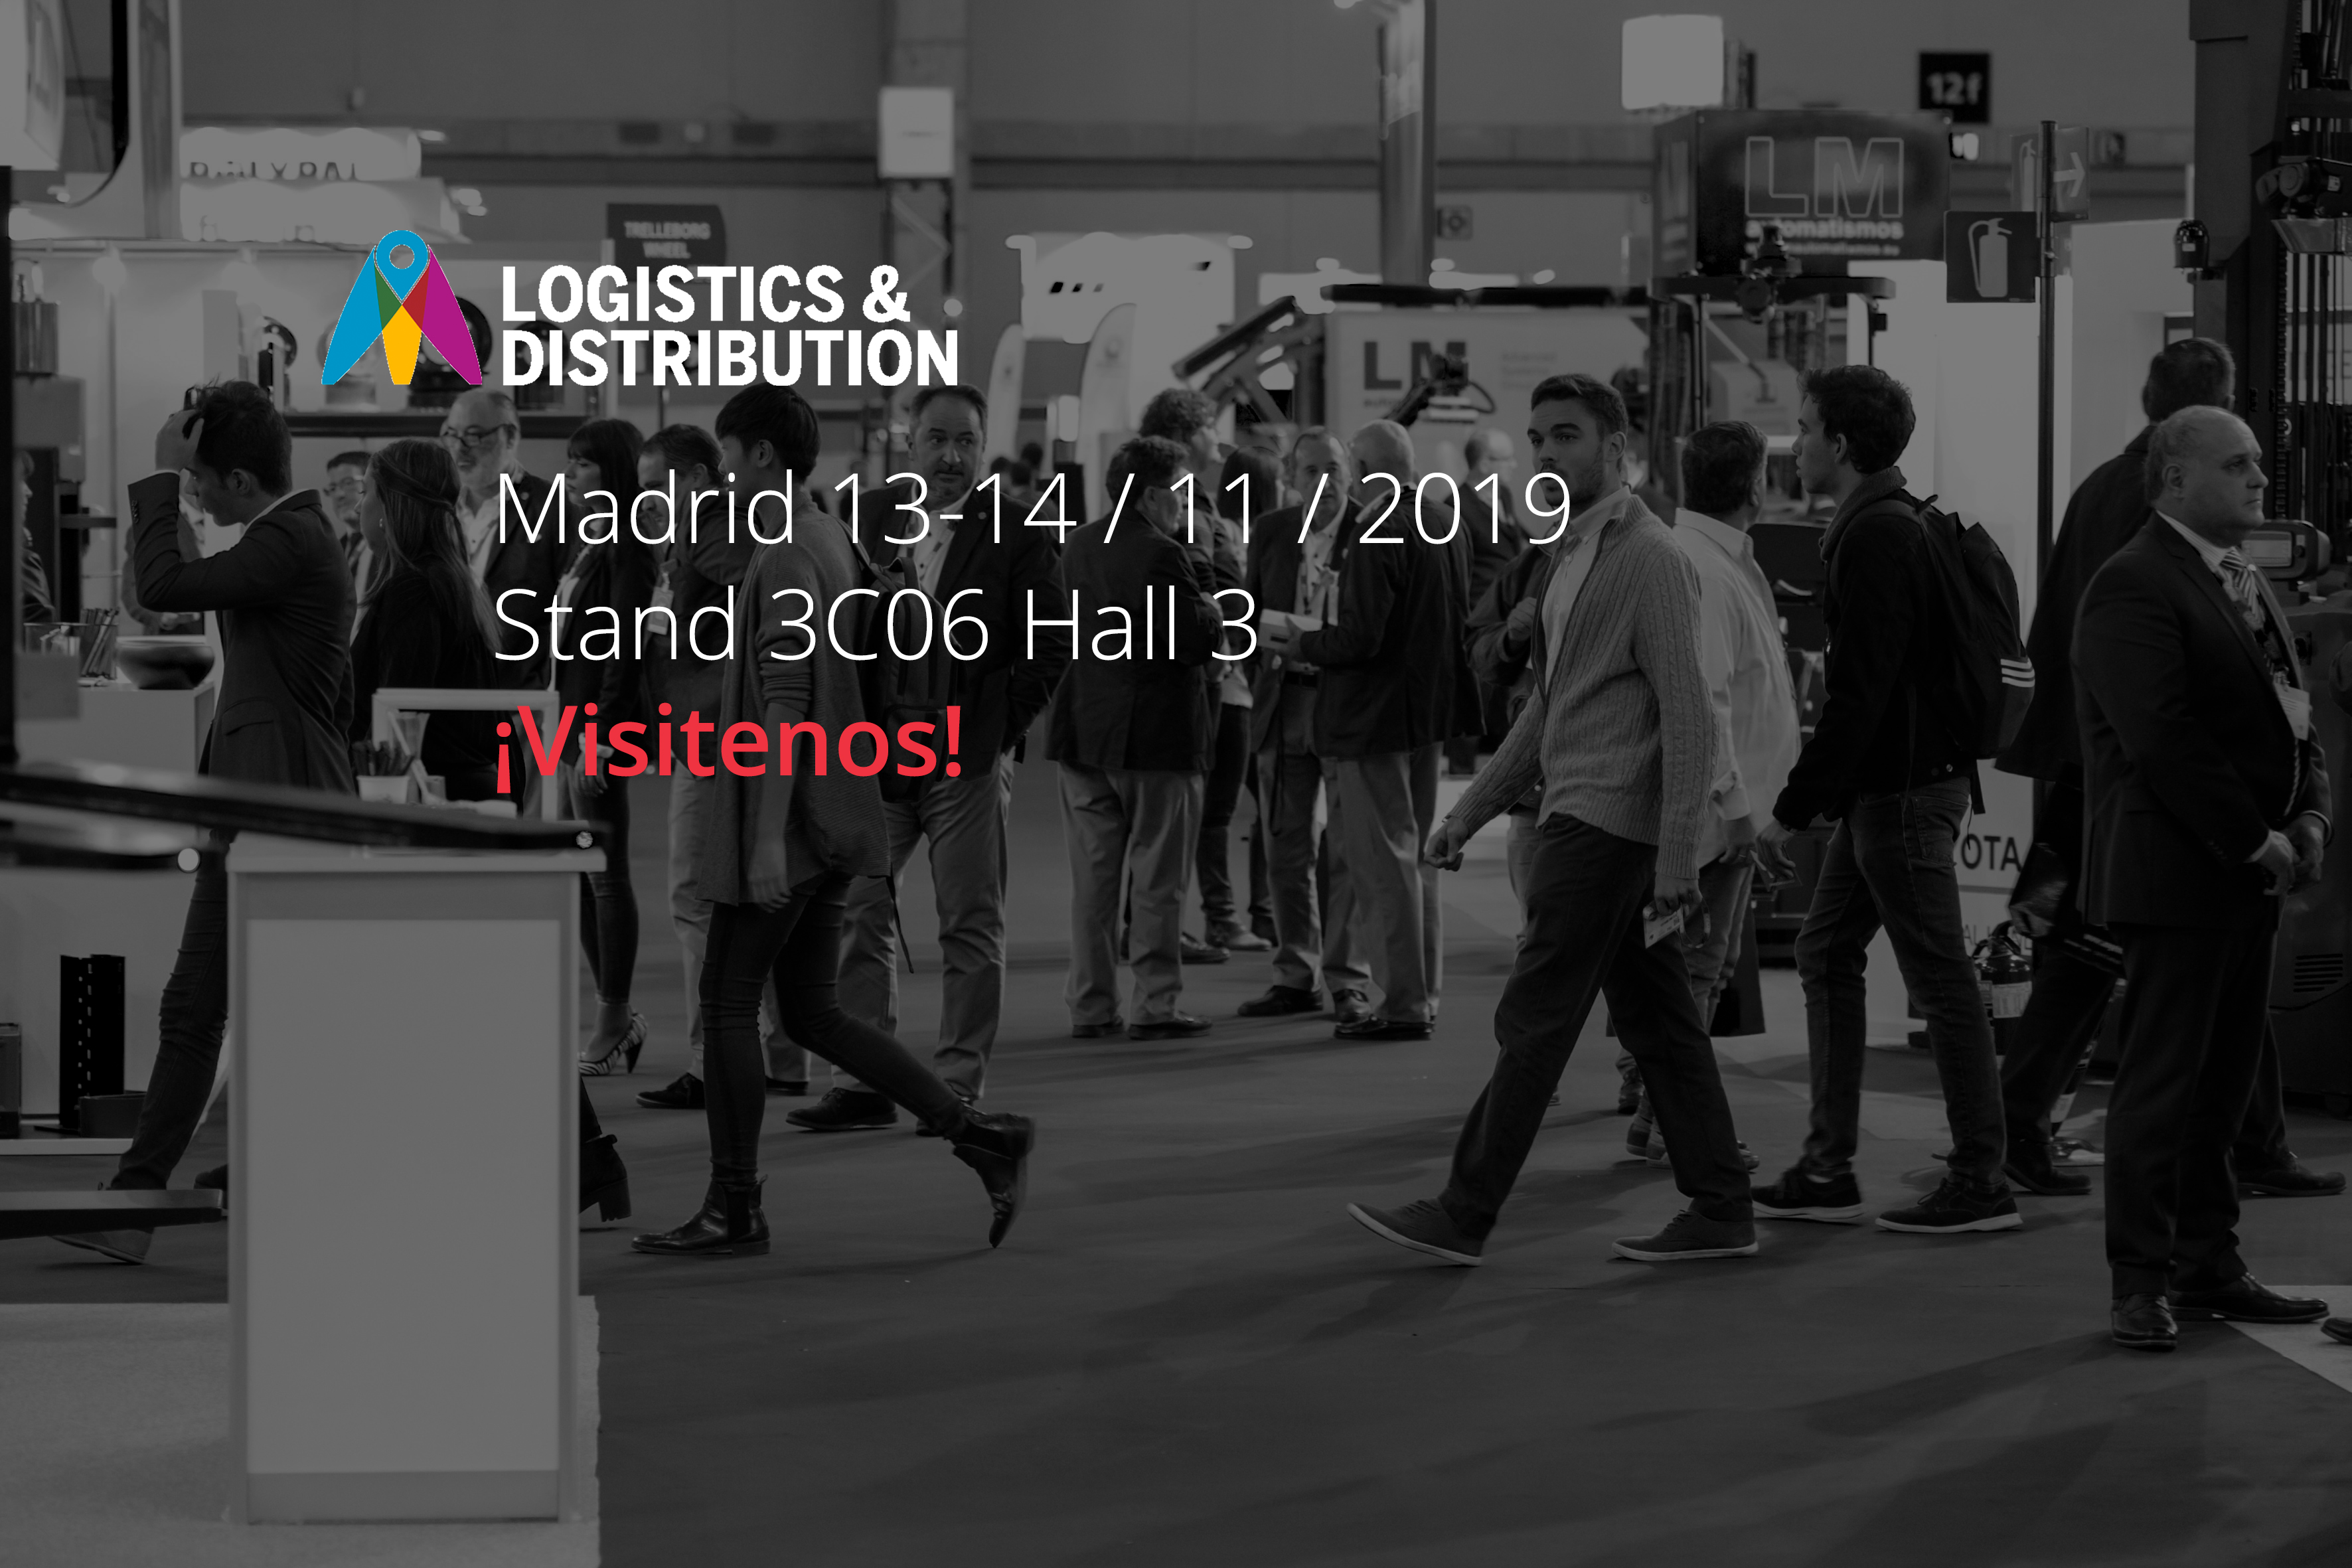 Pick To Light Systems will be present on 13 and 14 November at the Logistics fair in Madrid